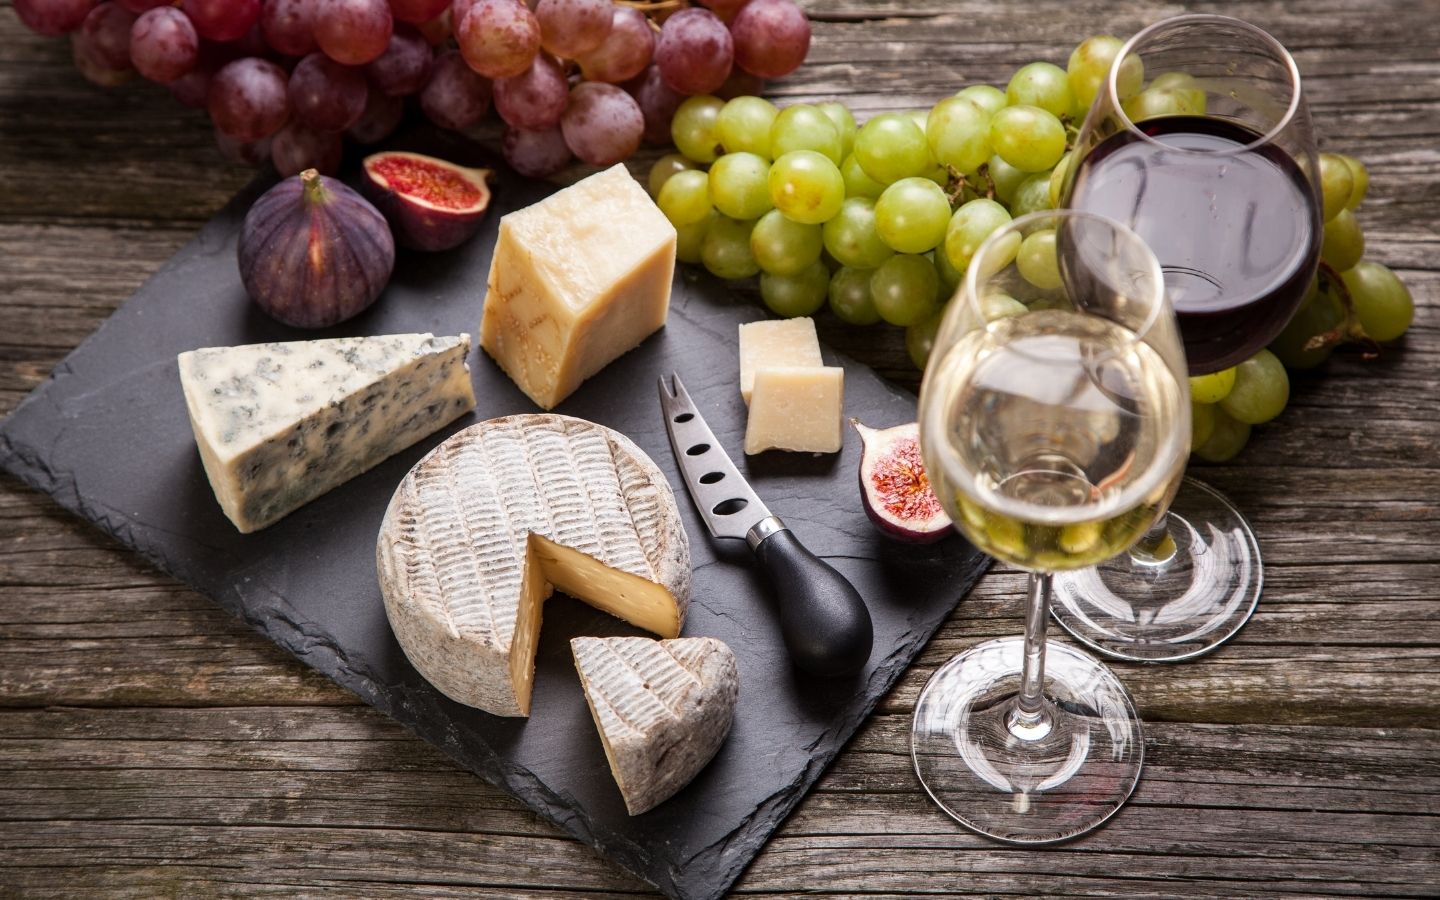 Red and green grapes, different types of cheese and two glasses of red and white wine